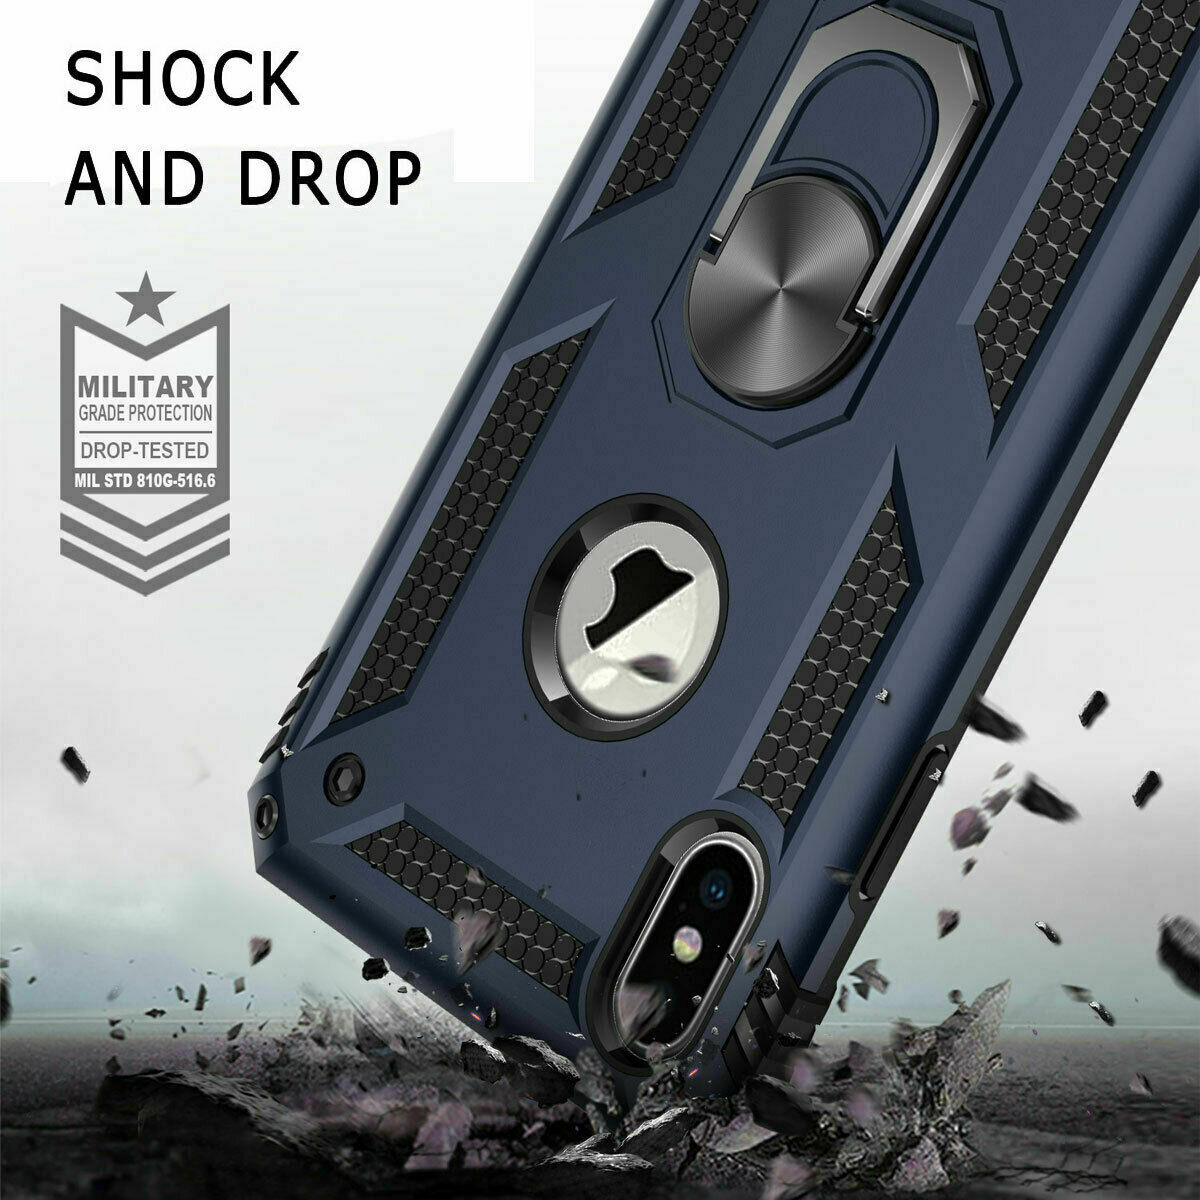 Case Shockproof Rubber Hard For iPhone - carolay.co